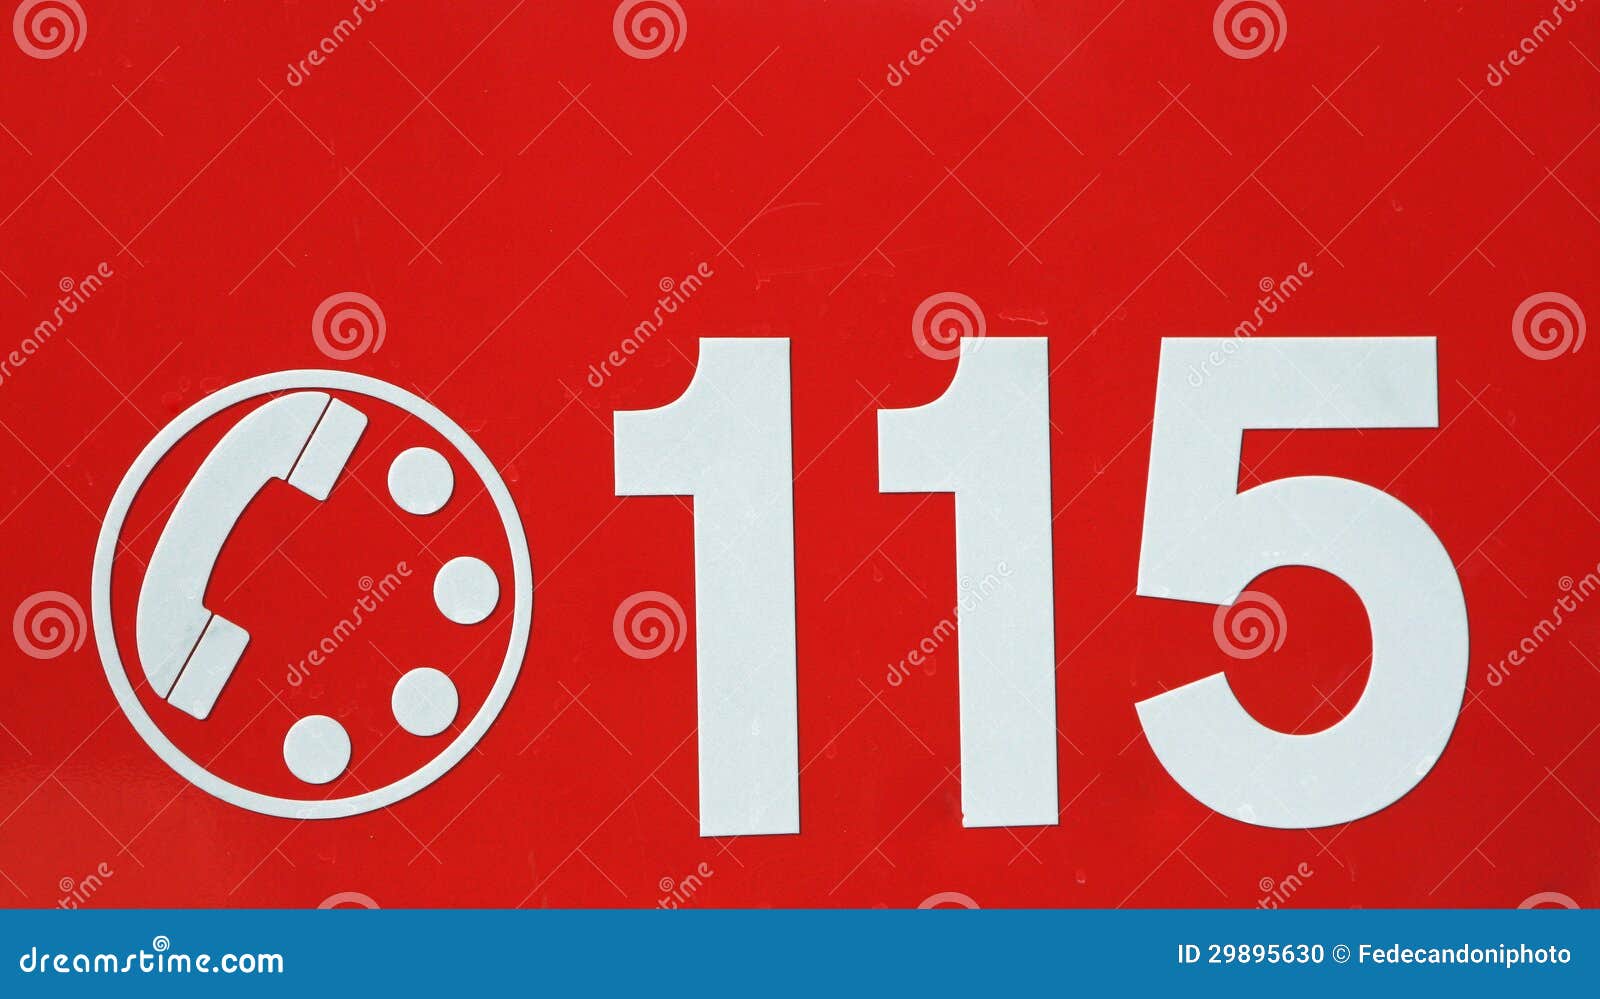 Telephone Number 115 On Red Background Of The Fire Brigade In It Stock ...
